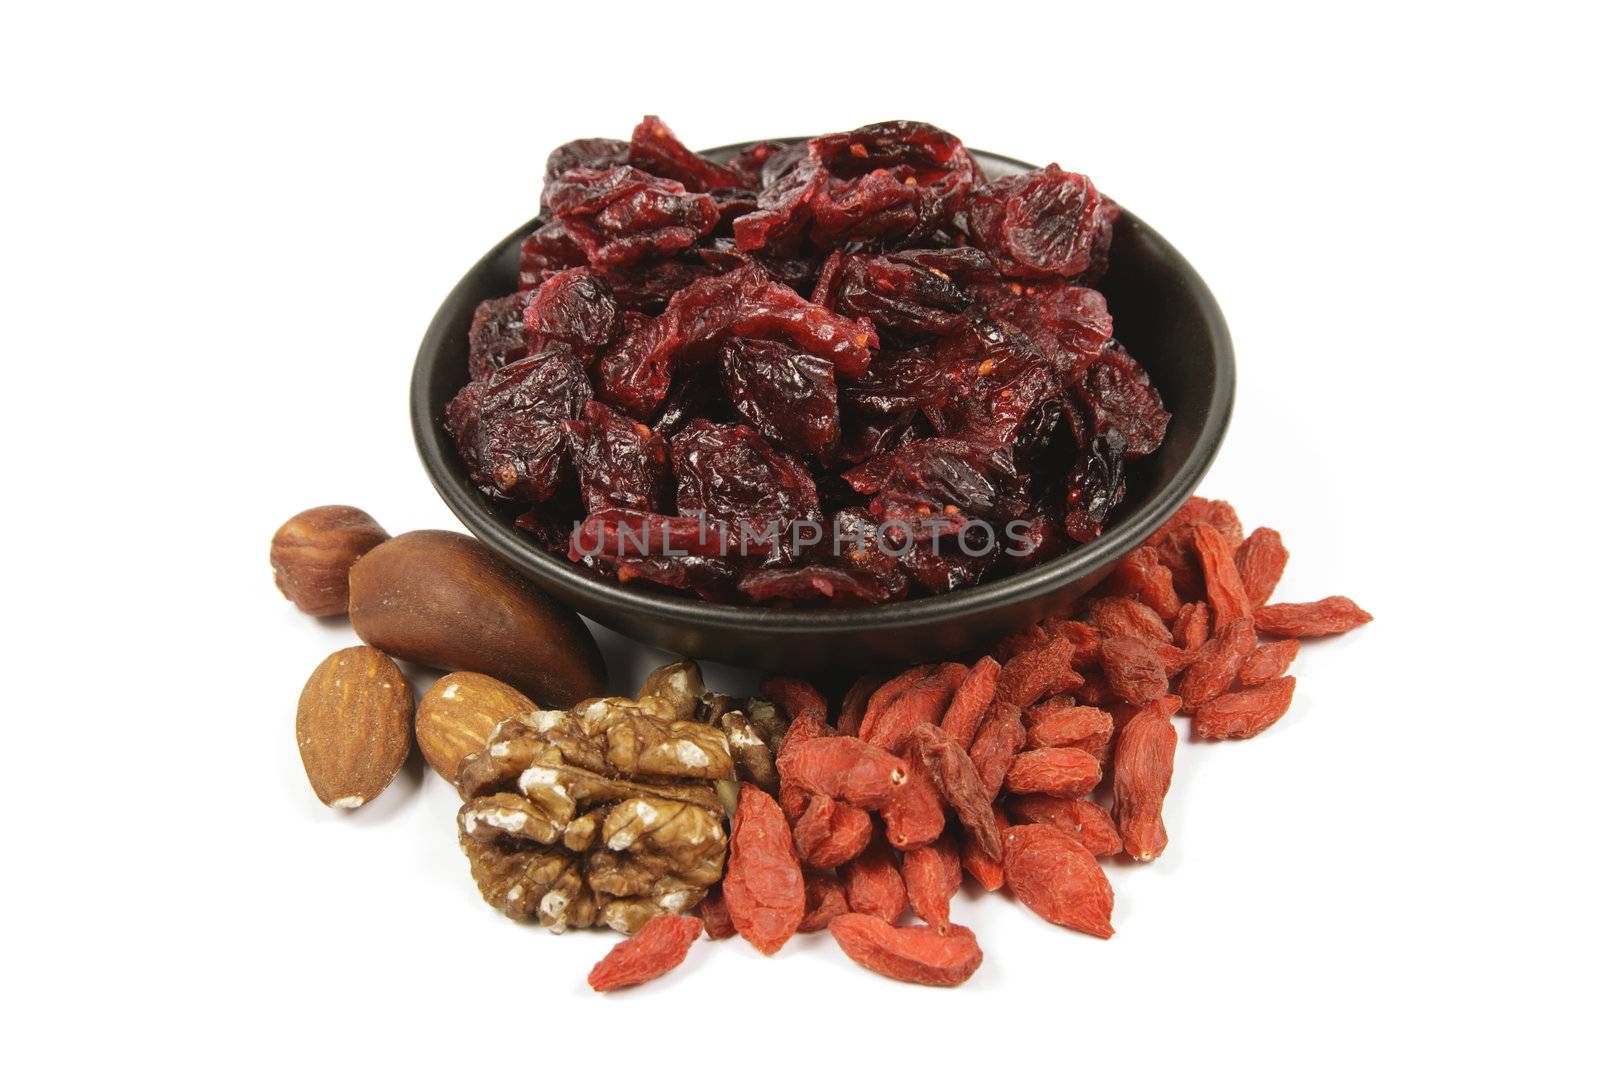 Red ripe dried cranberries in a small black bowl with mixed nuts and goji berries on a reflective white background